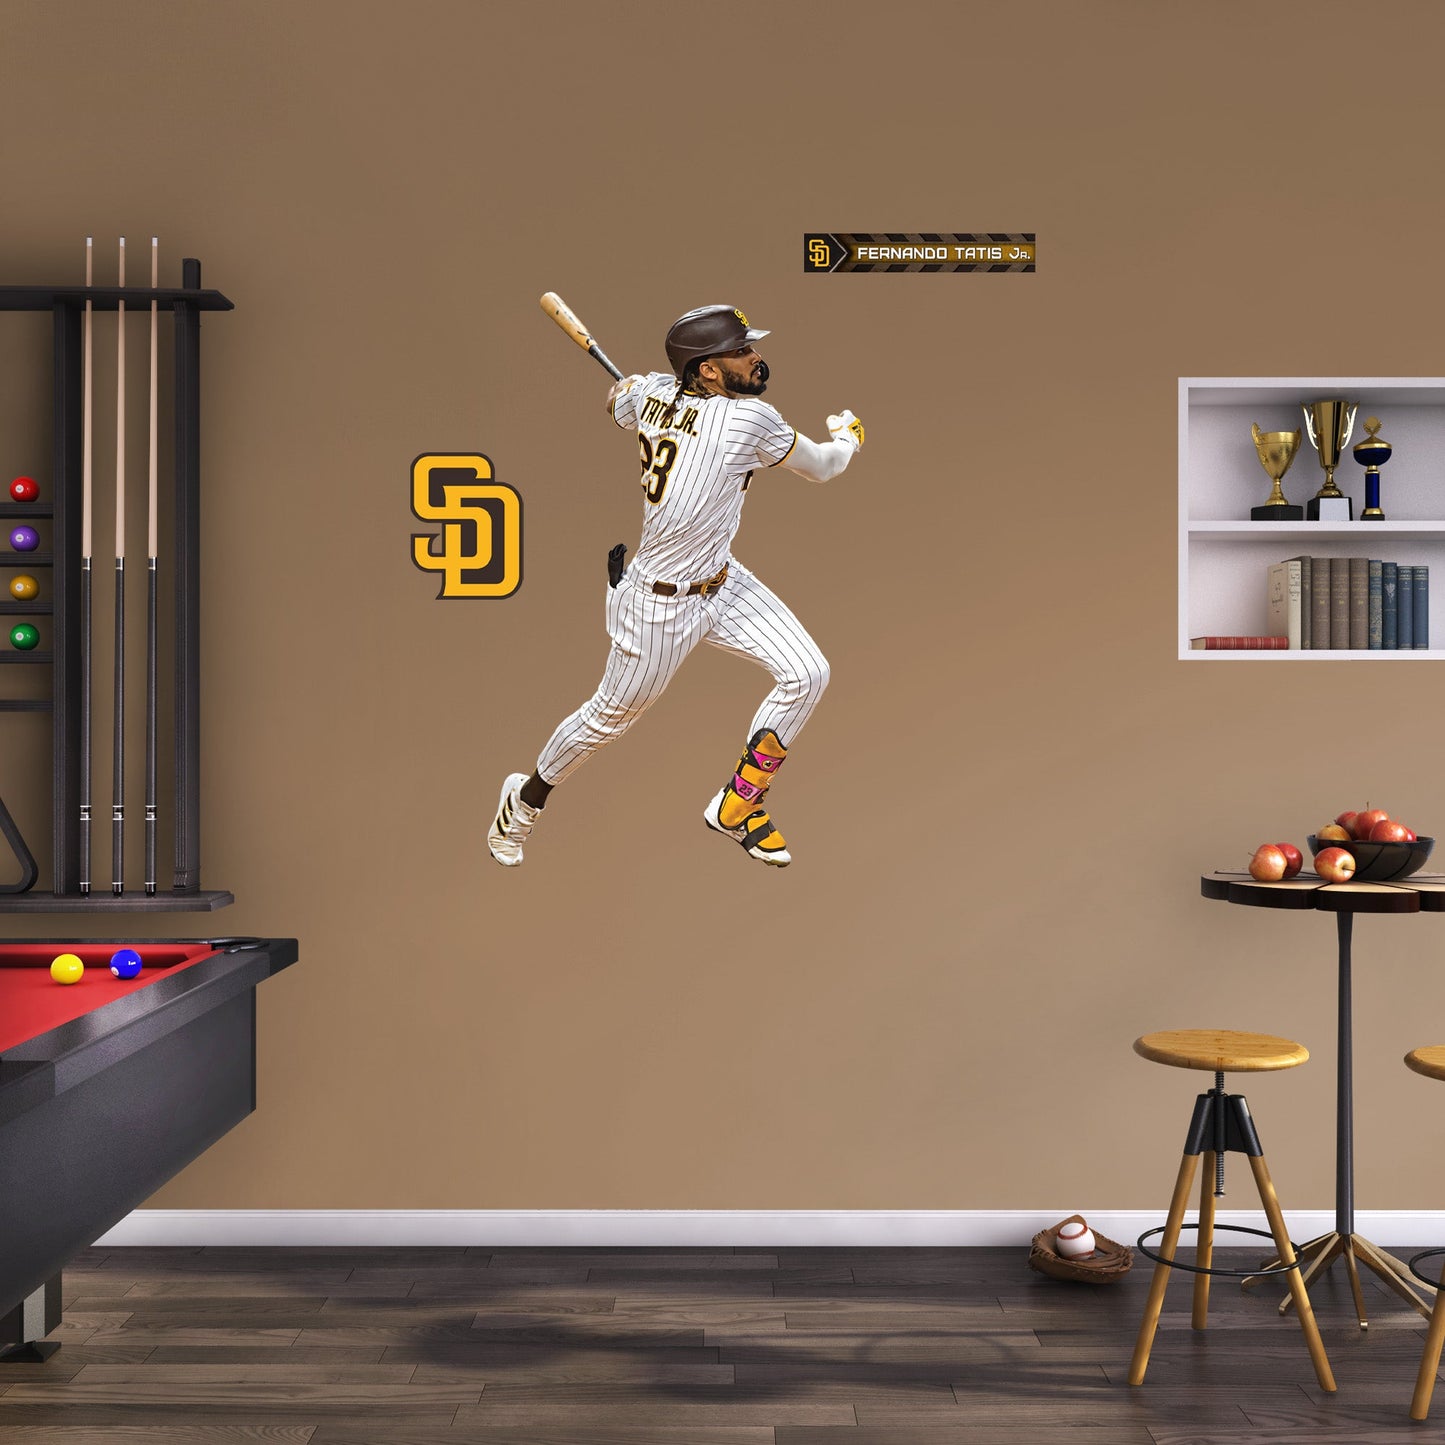 San Diego Padres: Fernando TatÃ­s Jr.         - Officially Licensed MLB Removable     Adhesive Decal